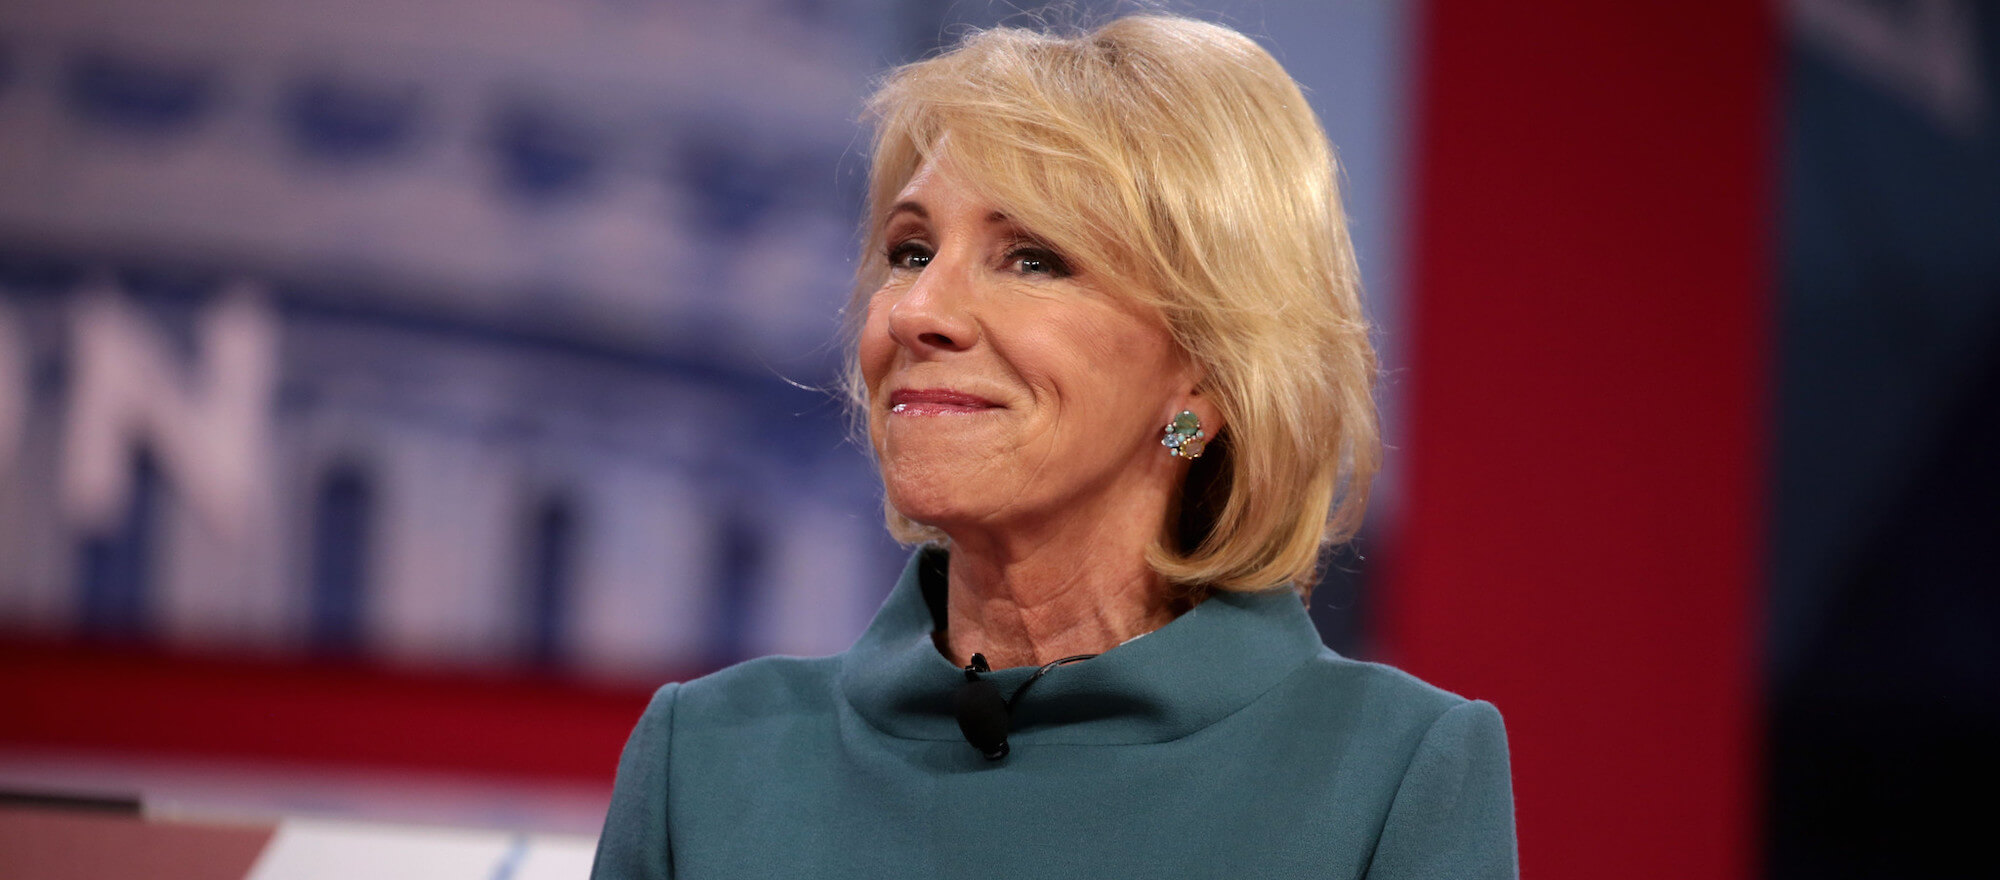 U.S. Secretary of Education Betsy DeVos speaking at the 2018 Conservative Political Action Conference (CPAC) in National Harbor, Maryland. (Gage Skidmore)